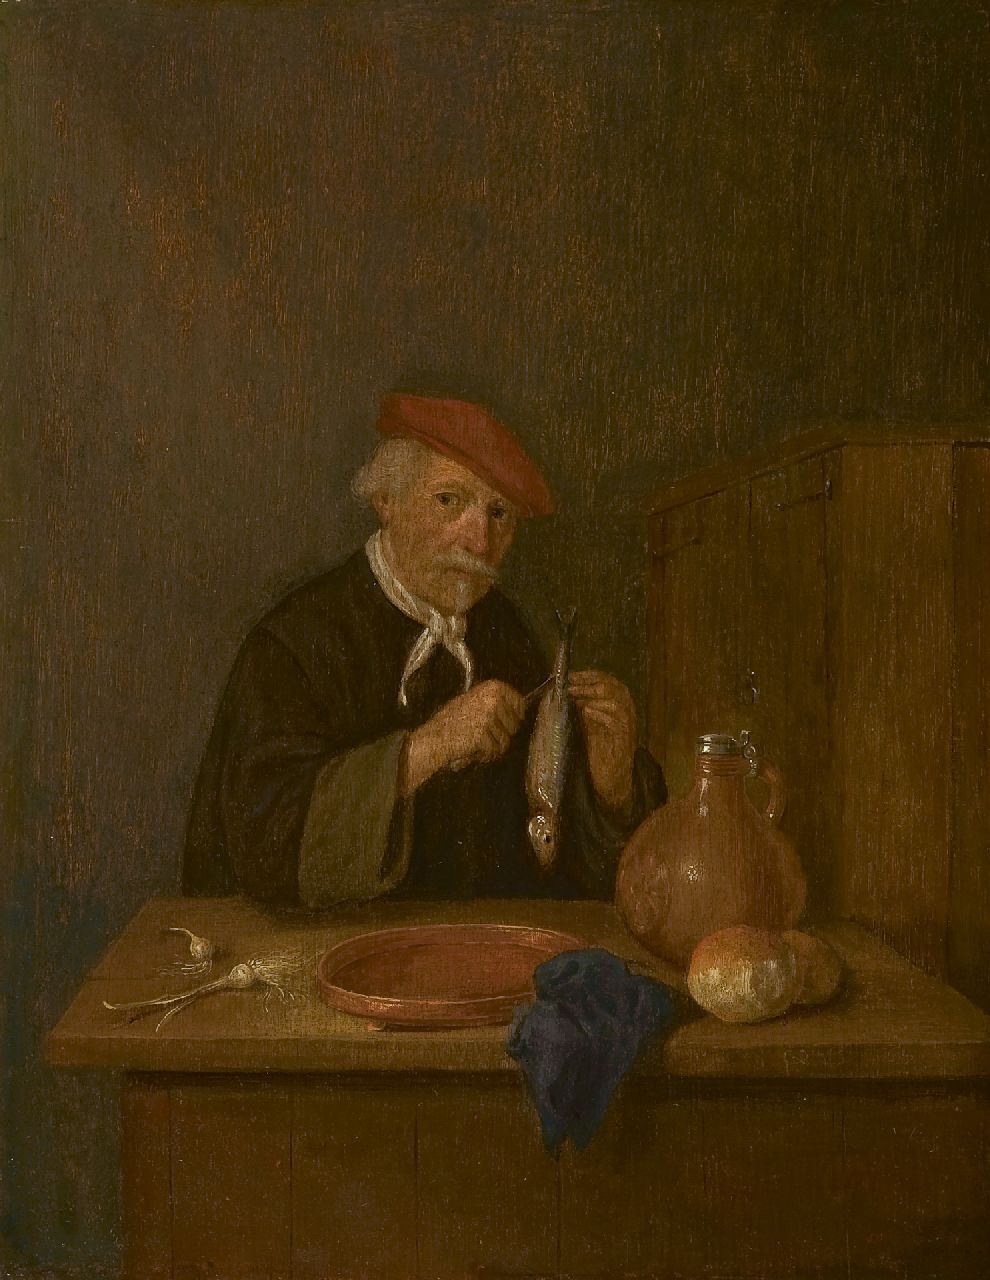 Brekelenkam Q.G. van | Quiringh Gerritz. van Brekelenkam | Paintings offered for sale | A man with a herring, oil on panel 39.5 x 30.4 cm, signed l.r. with initials and dated 1665